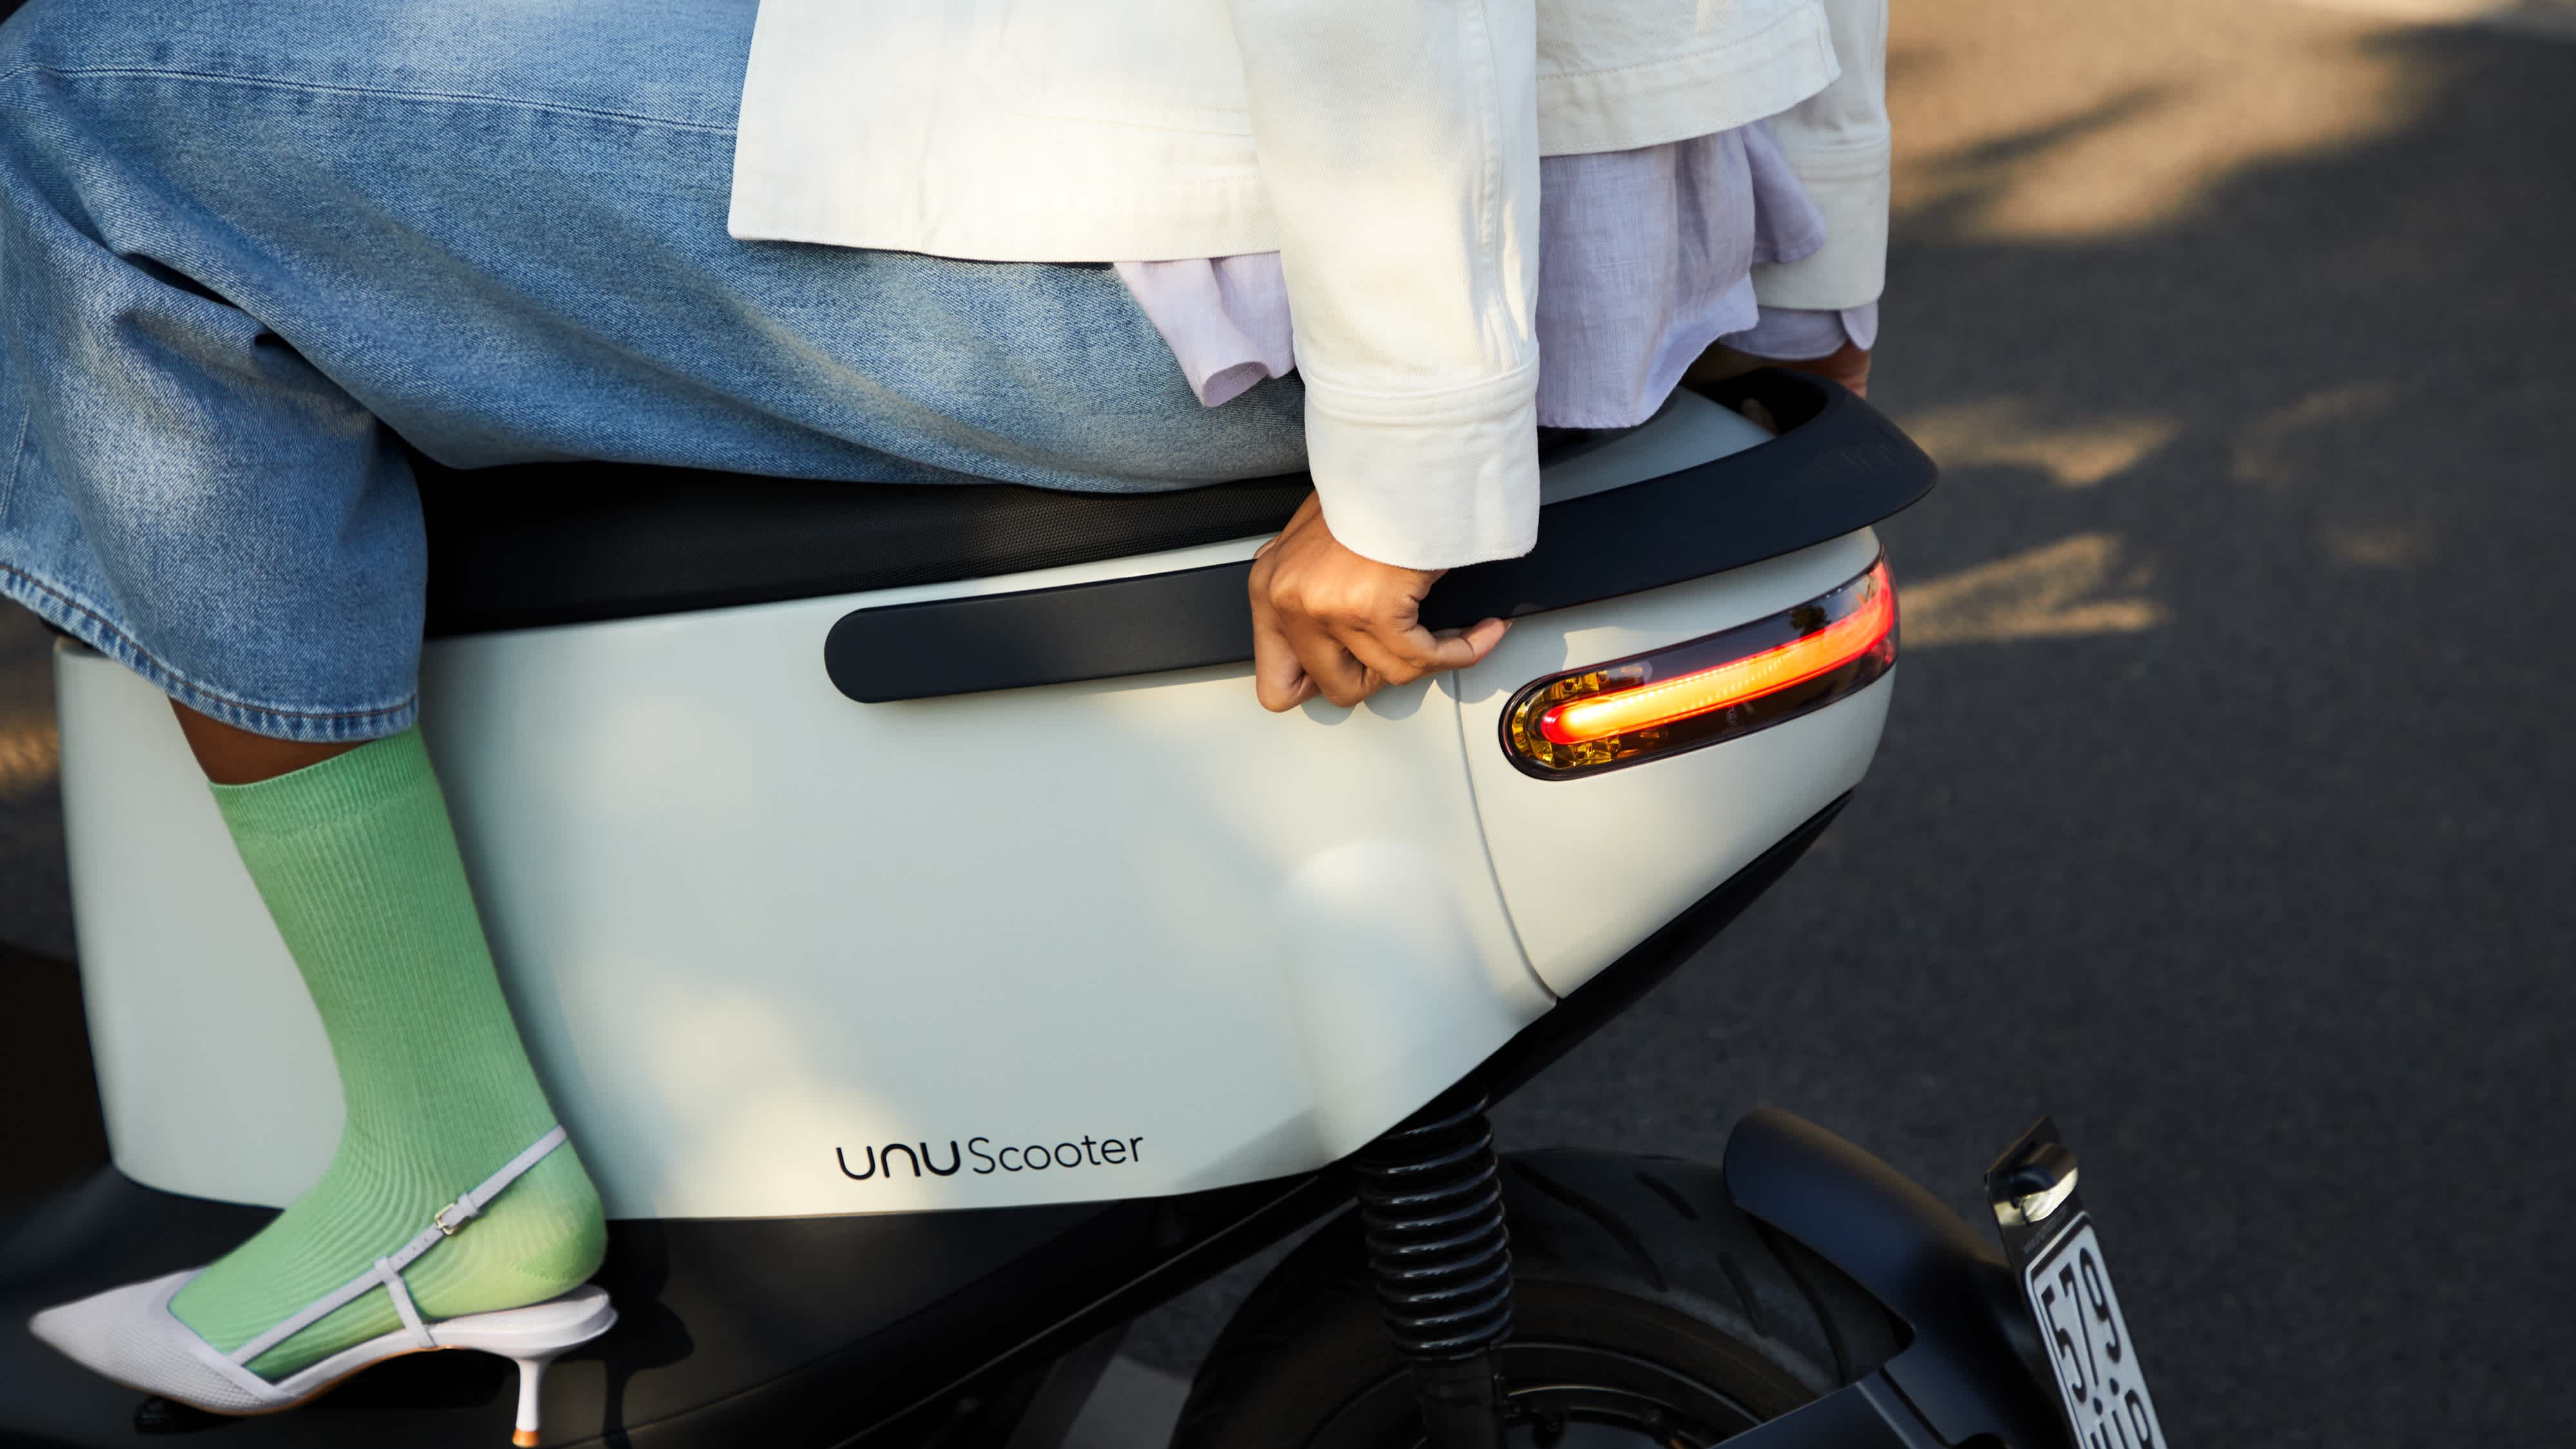 Unu is already well-known in many German cities, where numerous freedom-loving people are enjoying the perks of e-mobility and flexibility on their own unus. And the good news is true: Our powerful e-scooters are now also available in the Netherlands.